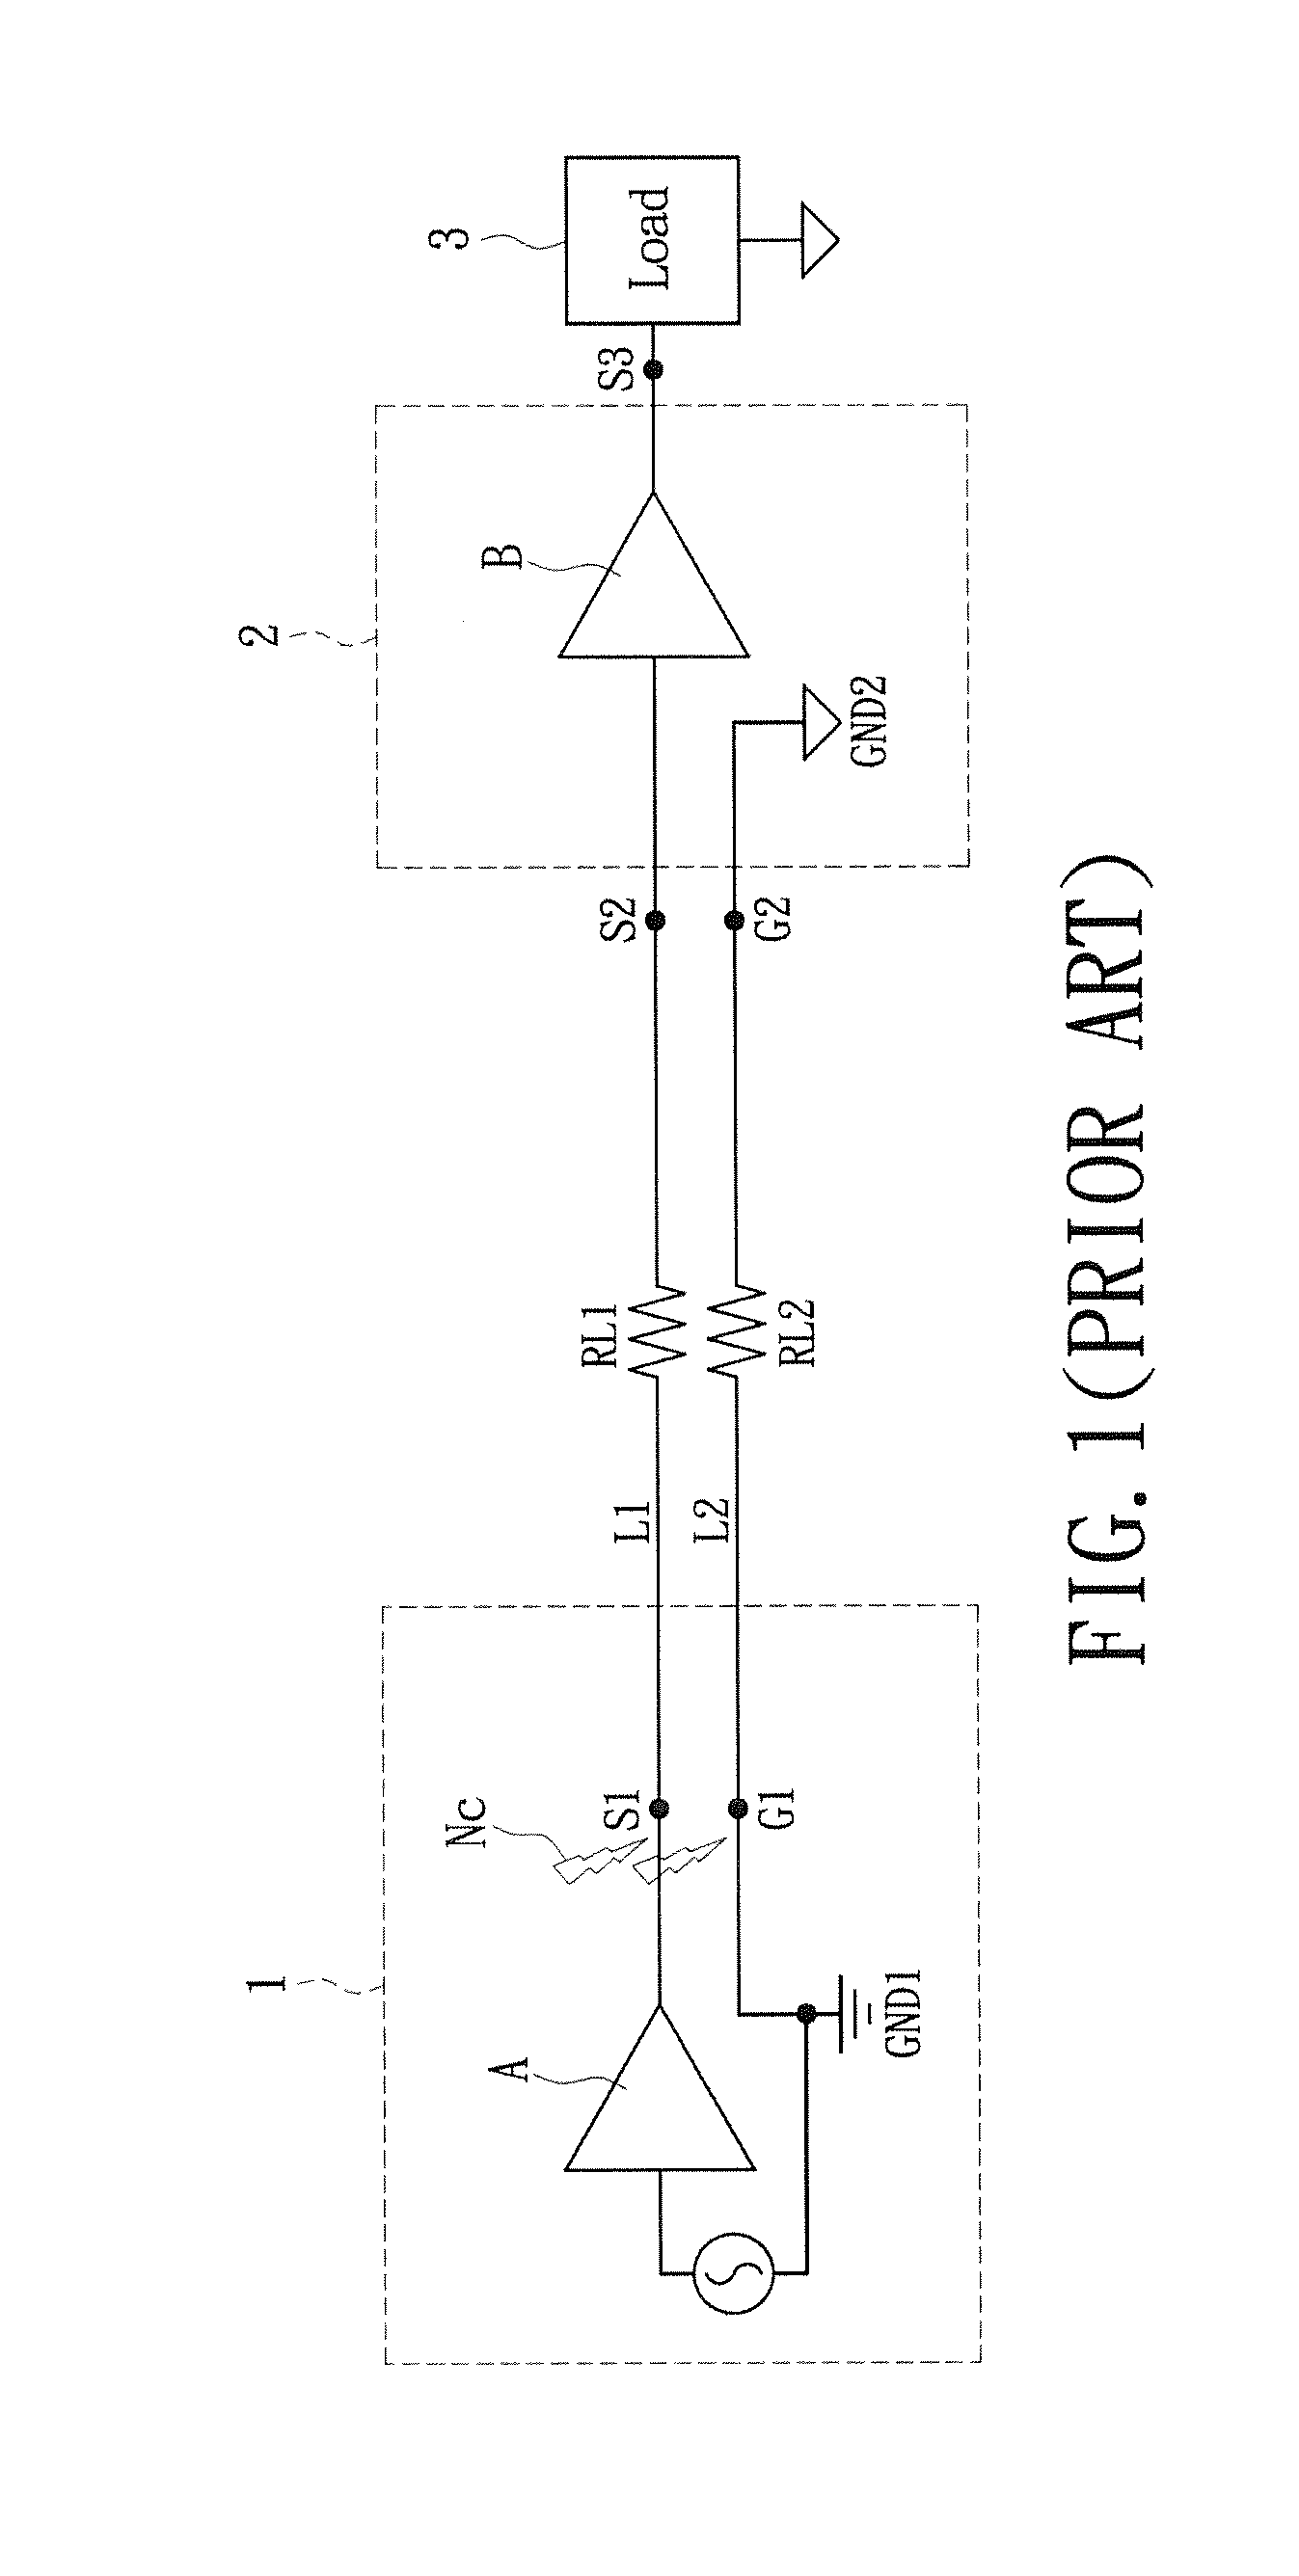 Common mode noise cancellation circuit for unbalanced signals